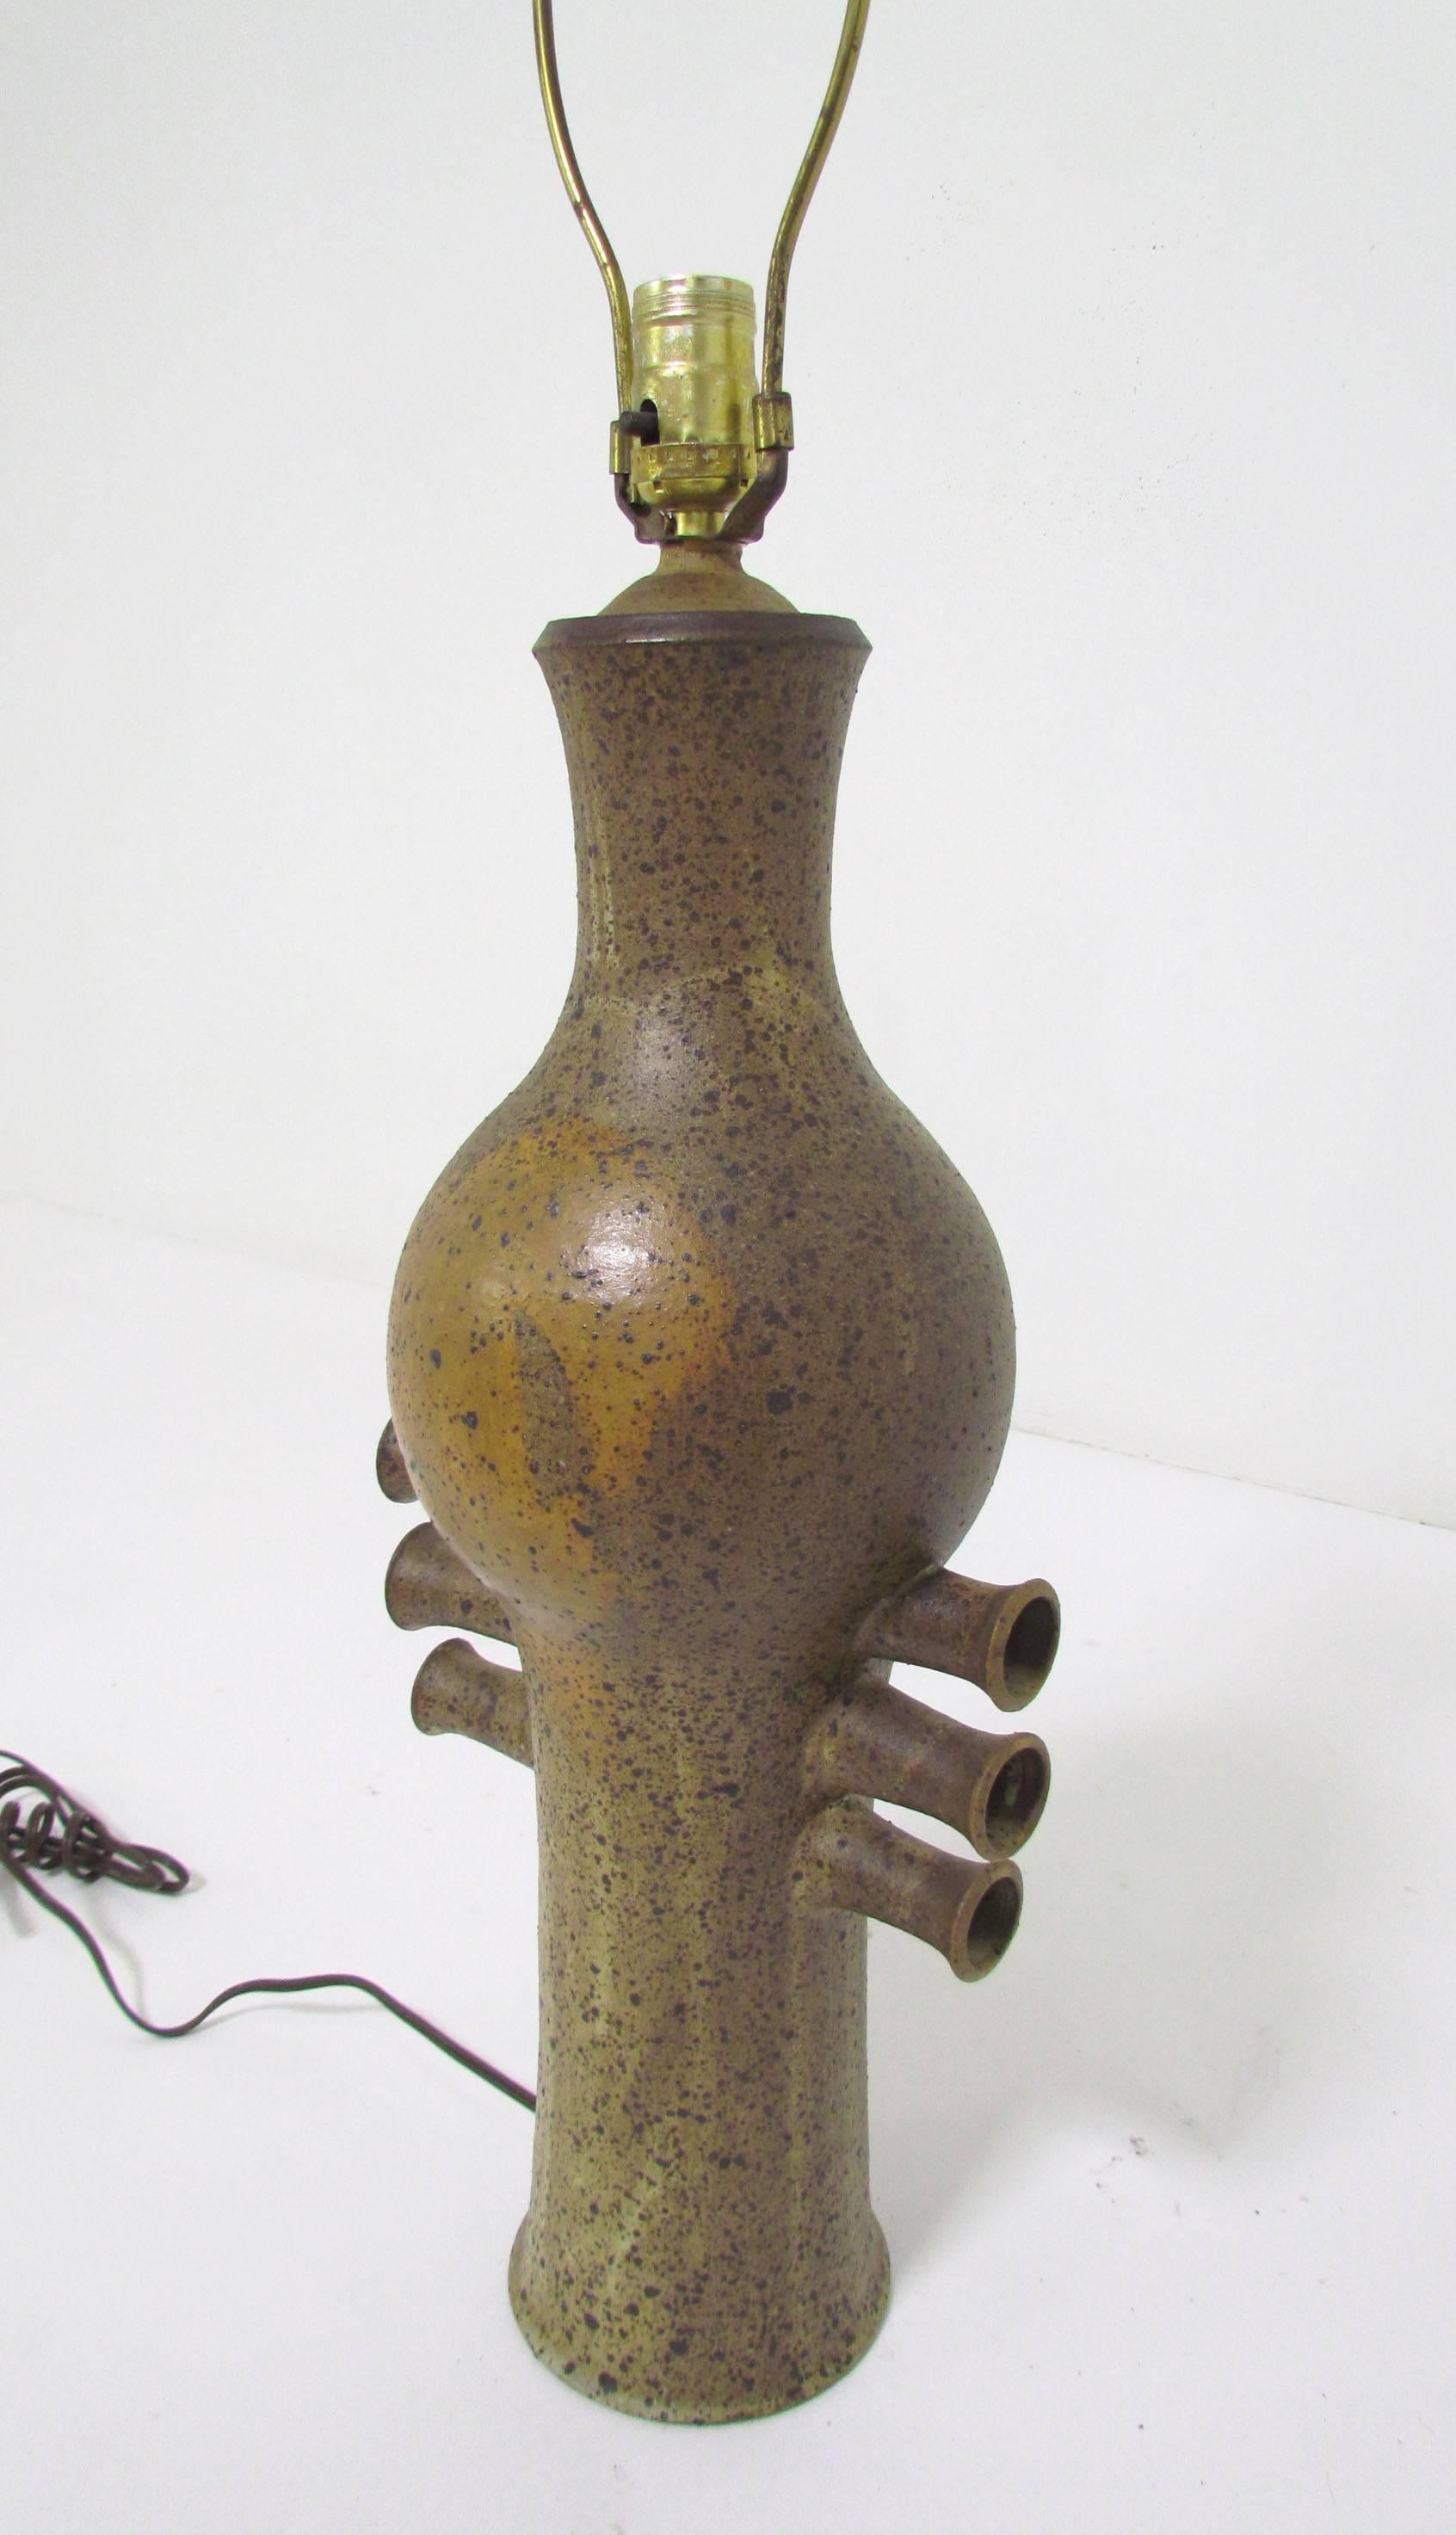 Sculptural hand thrown stoneware pottery lamp, circa 1970s. Impressive organic form. Height to top of finial is 34.5